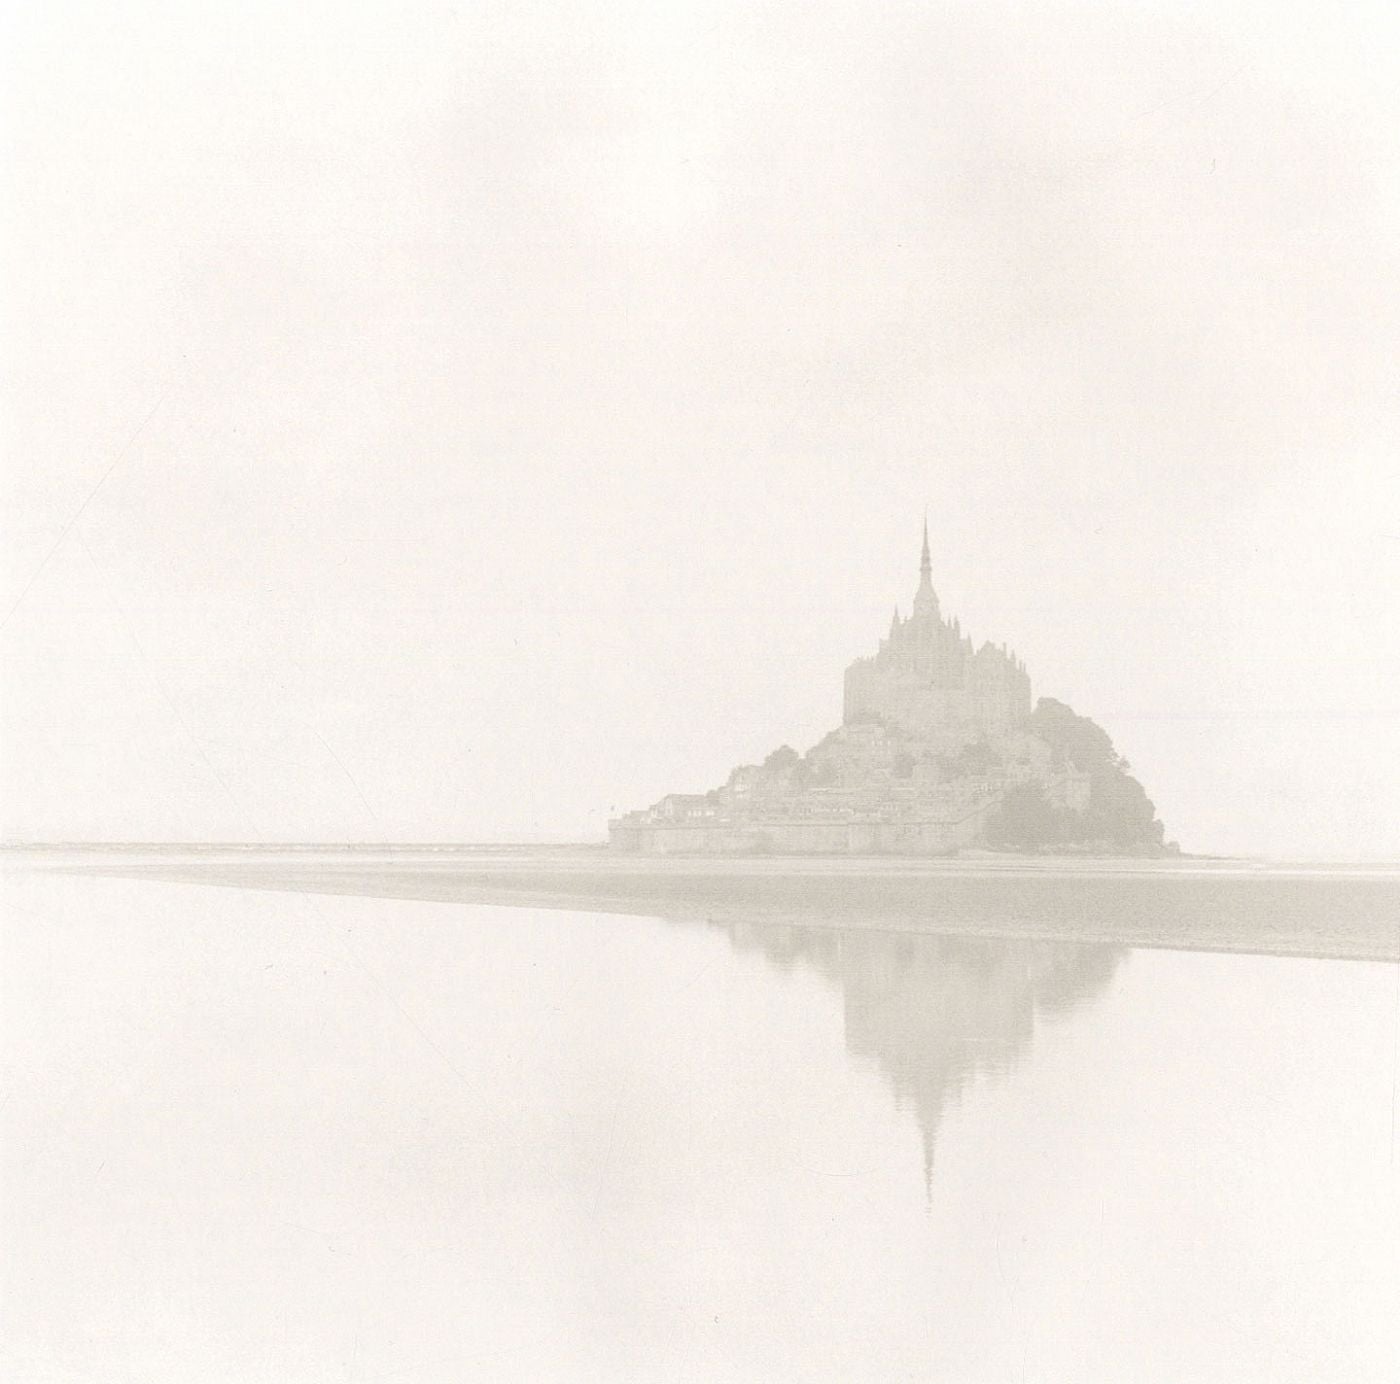 Michael Kenna: France, Limited Edition of 250 (in Clamshell Box) [SIGNED]